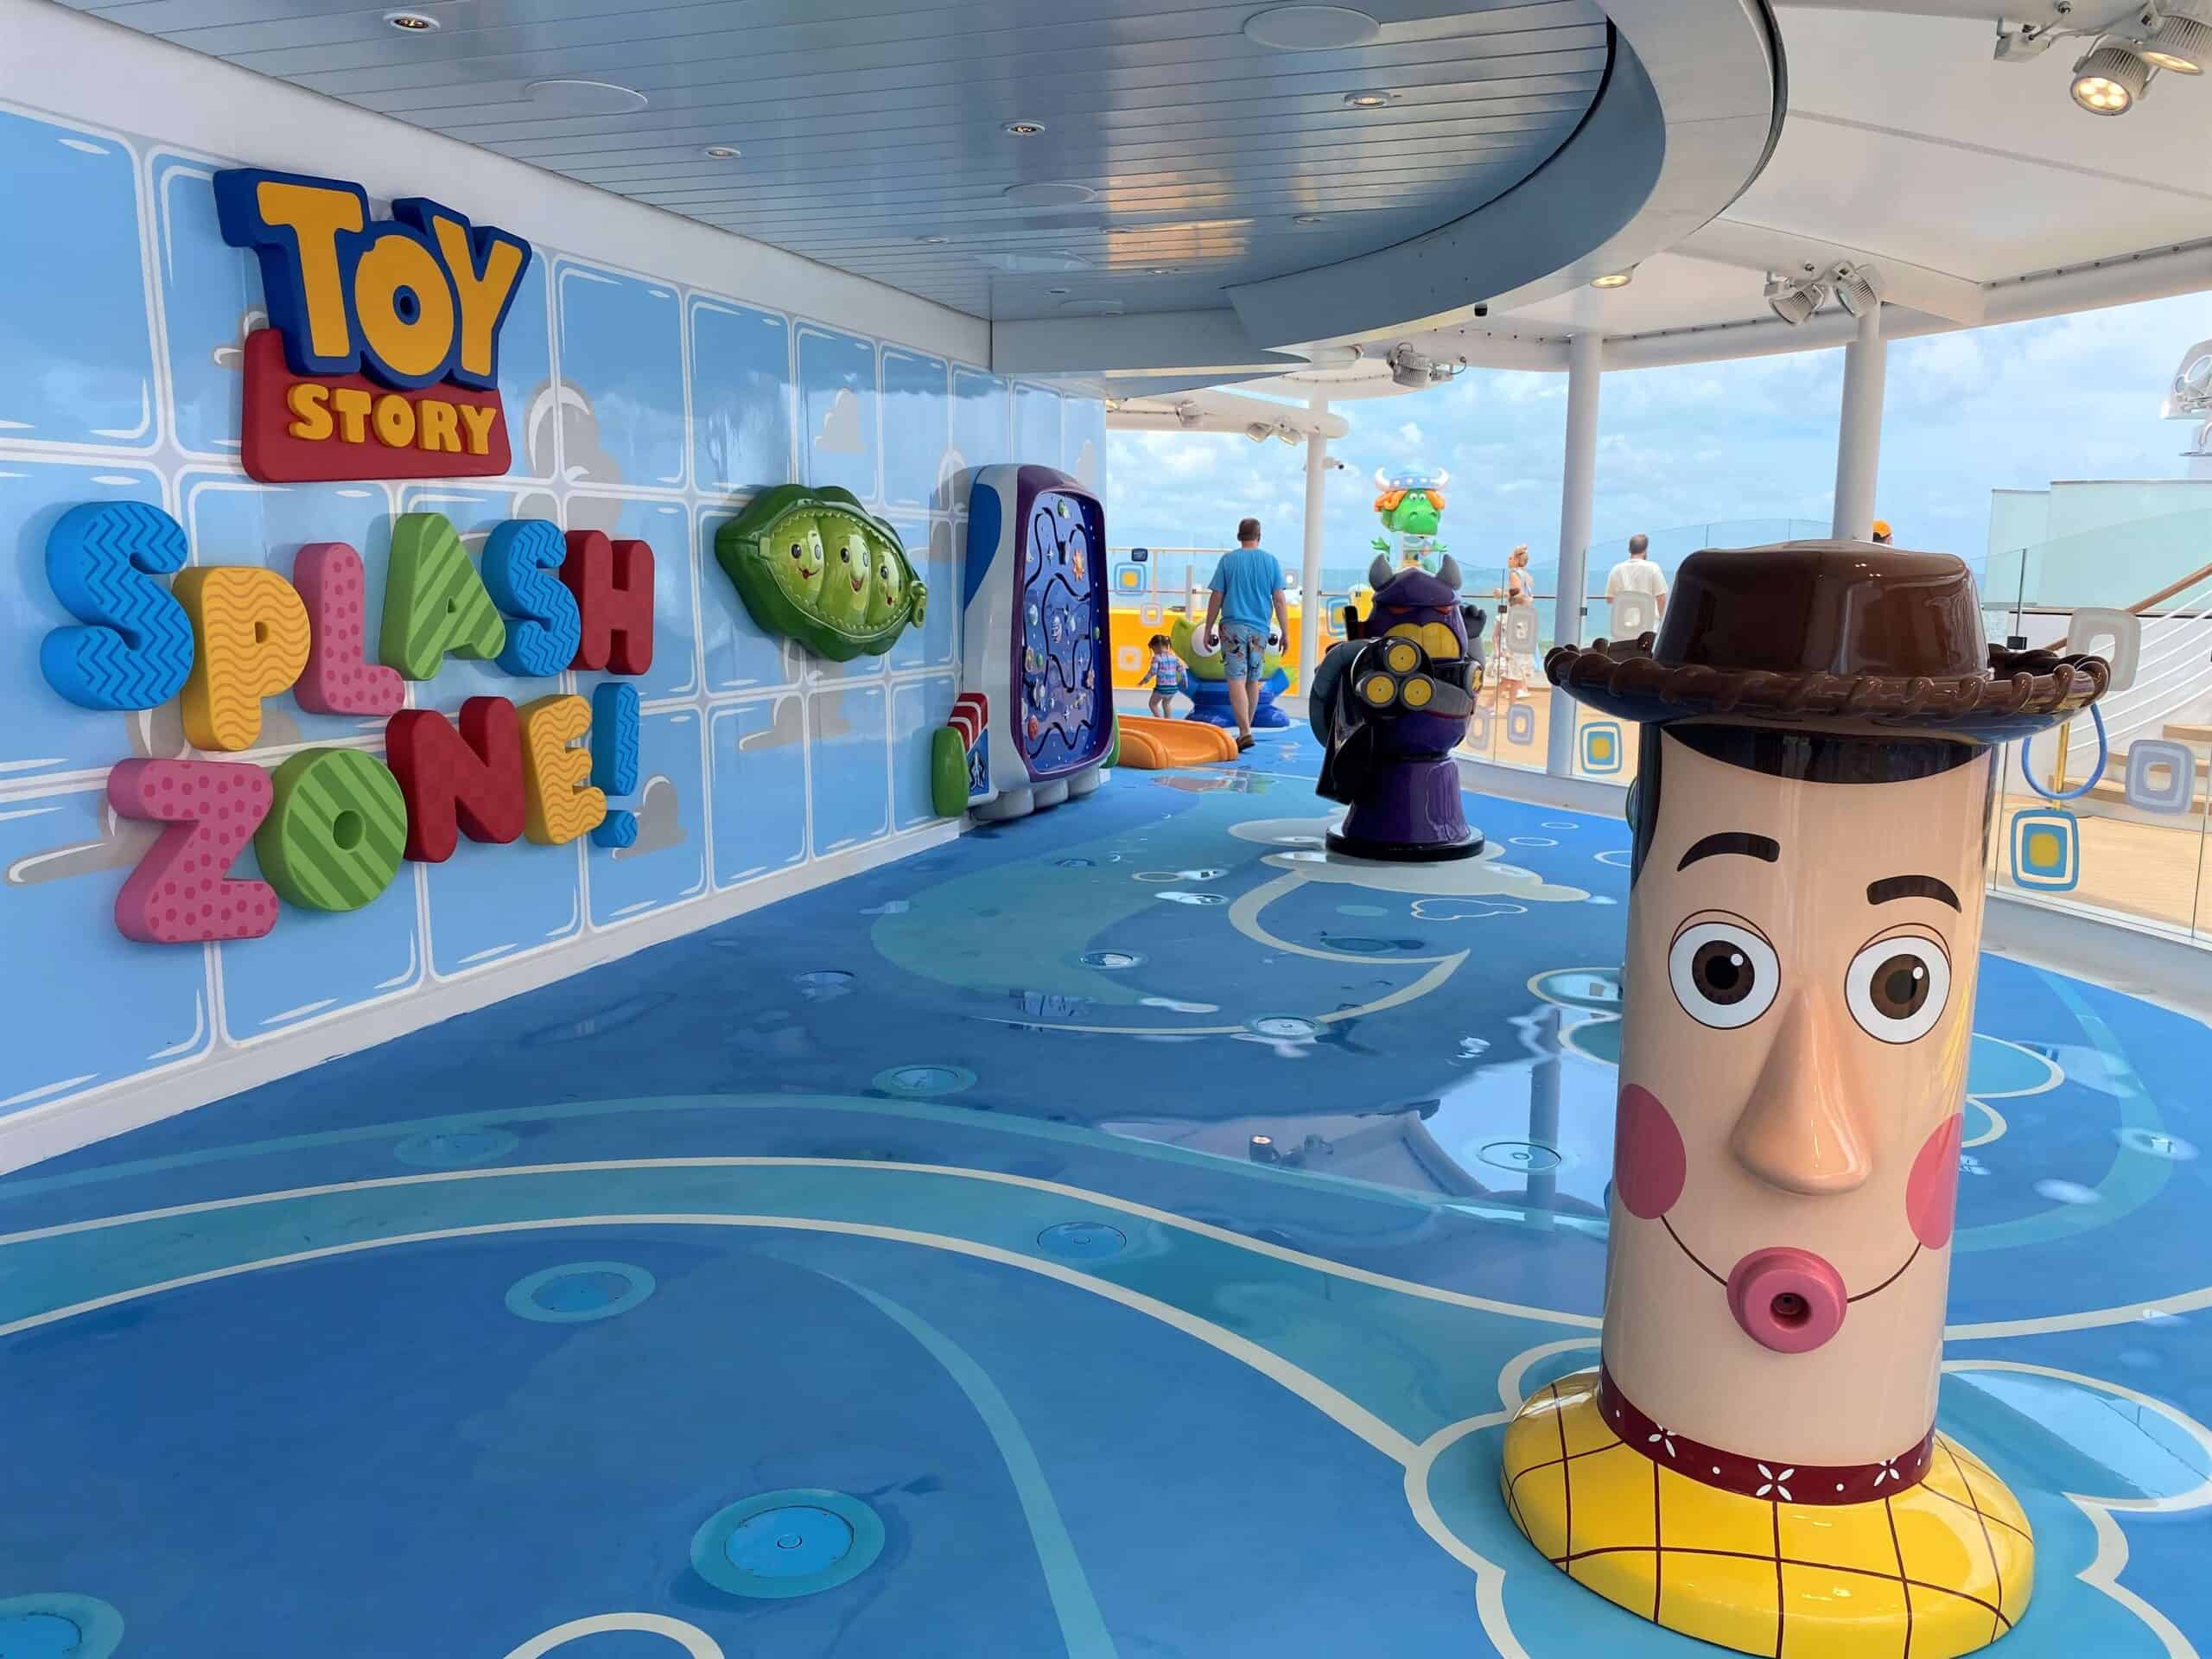 Toy Story Splash Zone on Disney Wish with Woody character in foreground and Zurg character behind